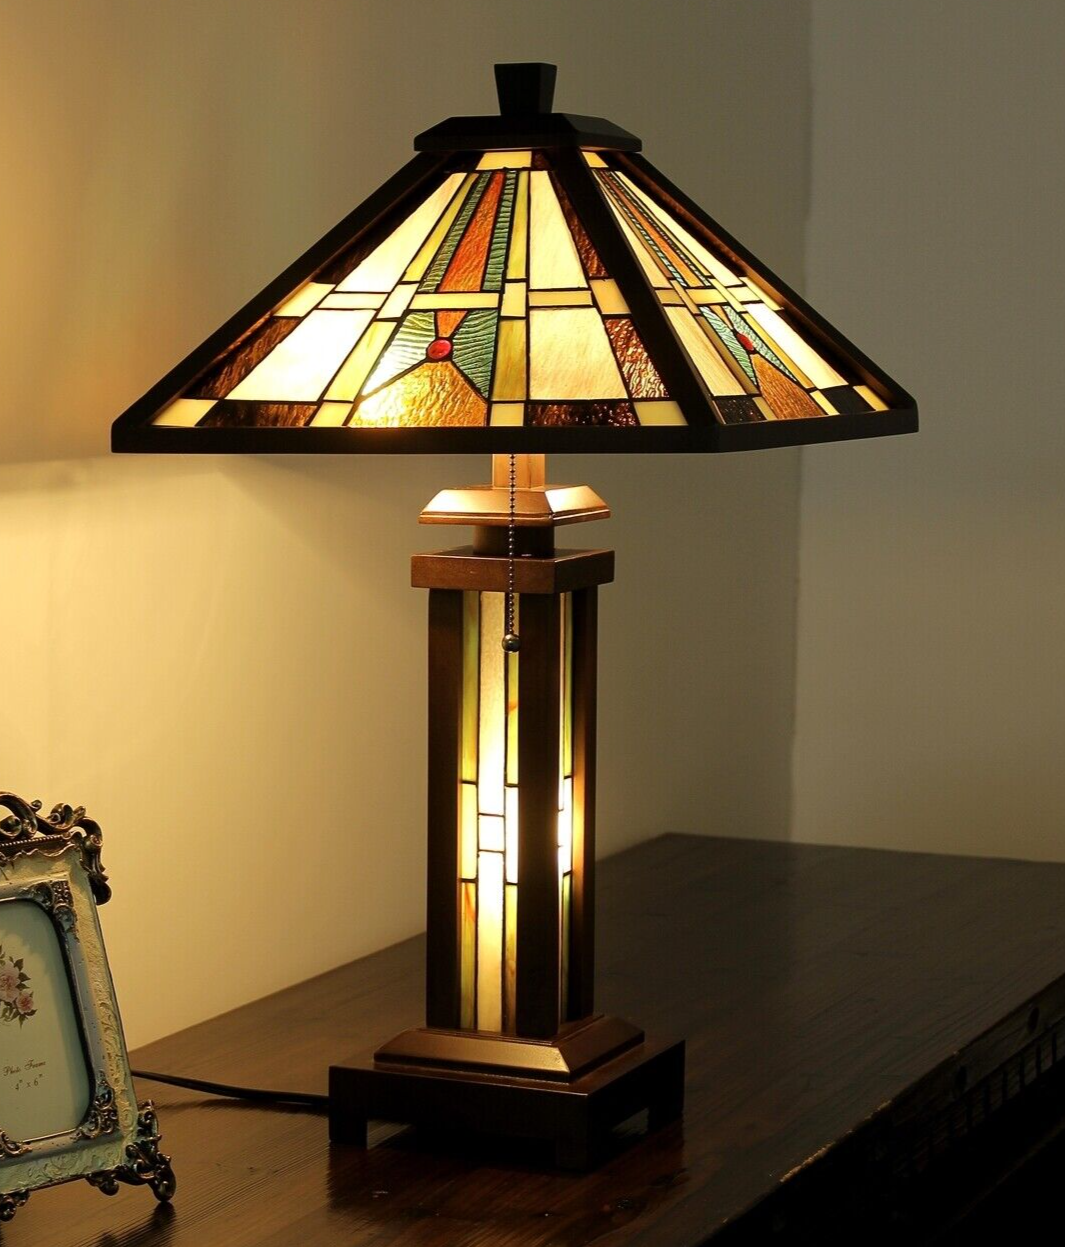 25.6  3 light Stained Glass Wood Mission Table Lamp